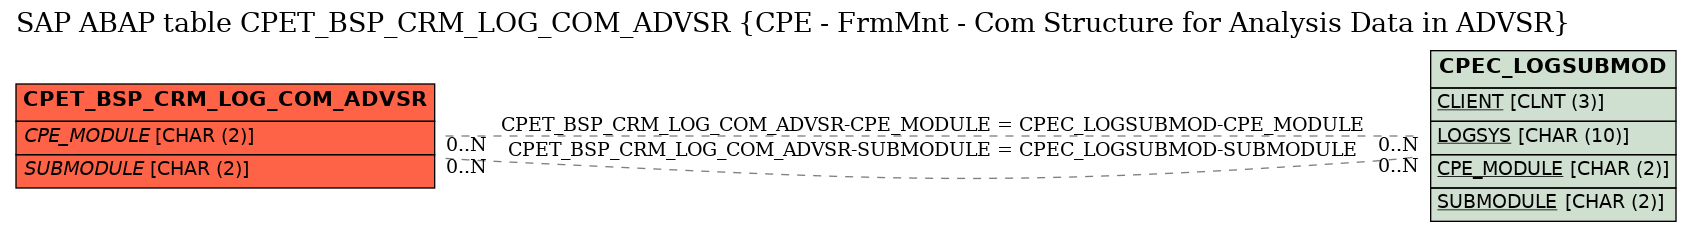 E-R Diagram for table CPET_BSP_CRM_LOG_COM_ADVSR (CPE - FrmMnt - Com Structure for Analysis Data in ADVSR)